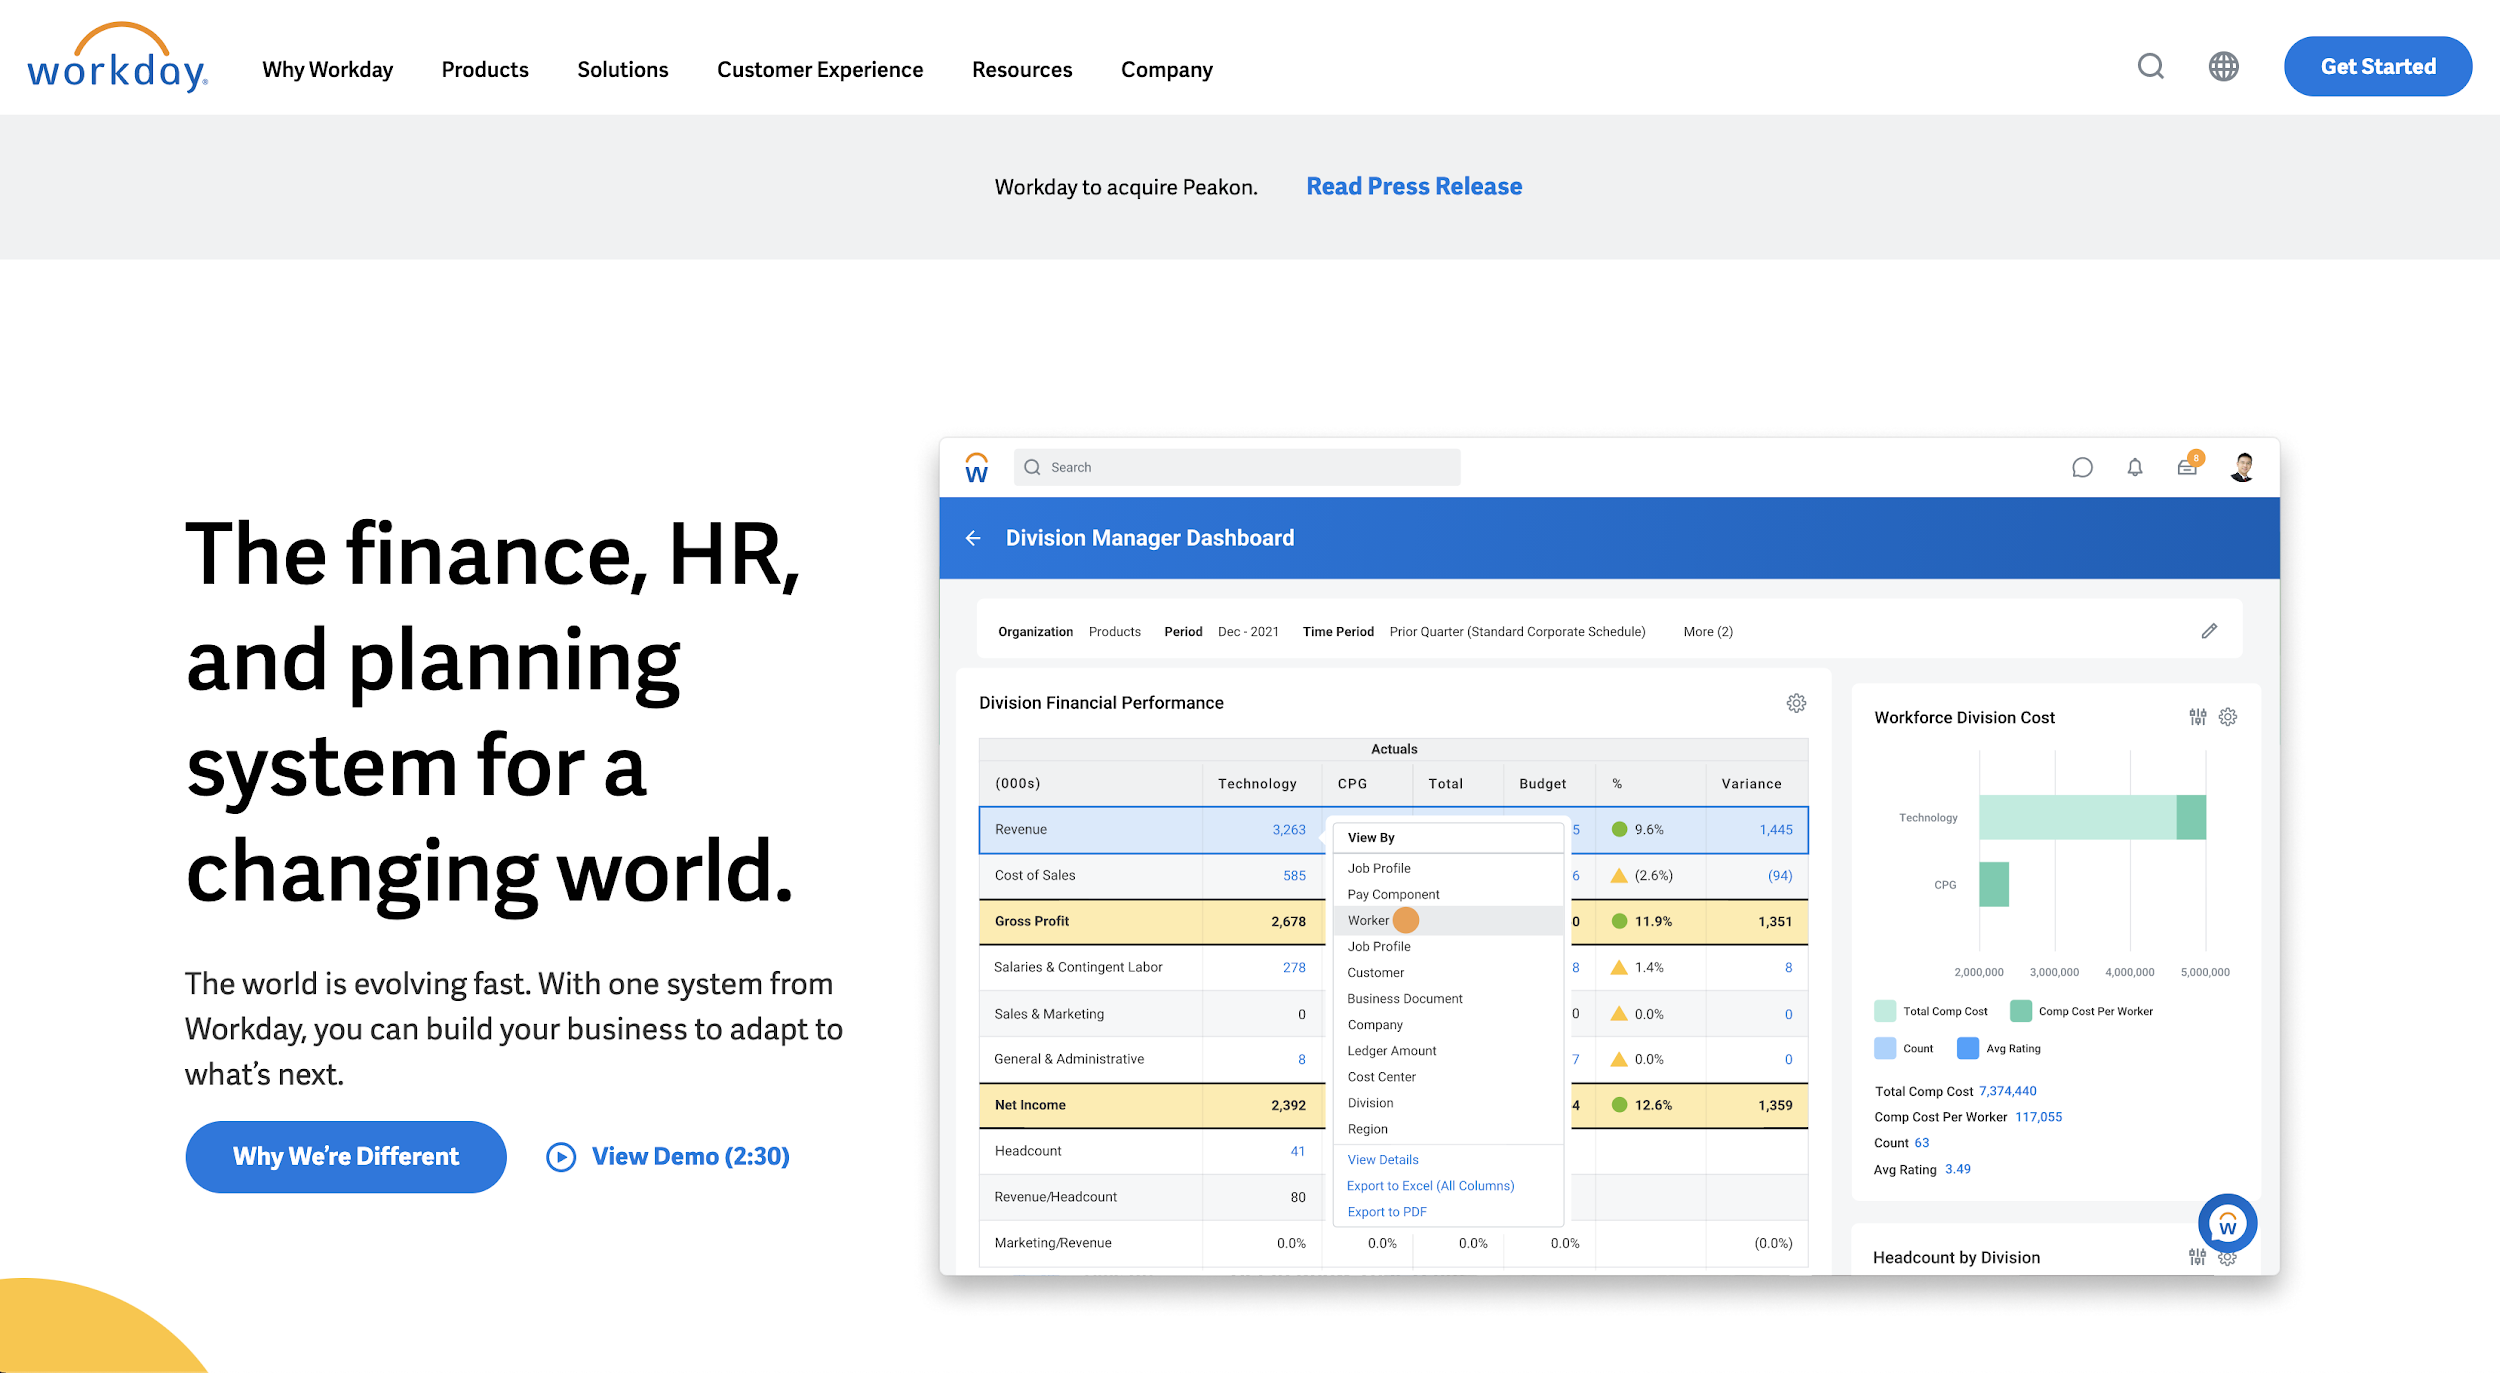 Workday homepage